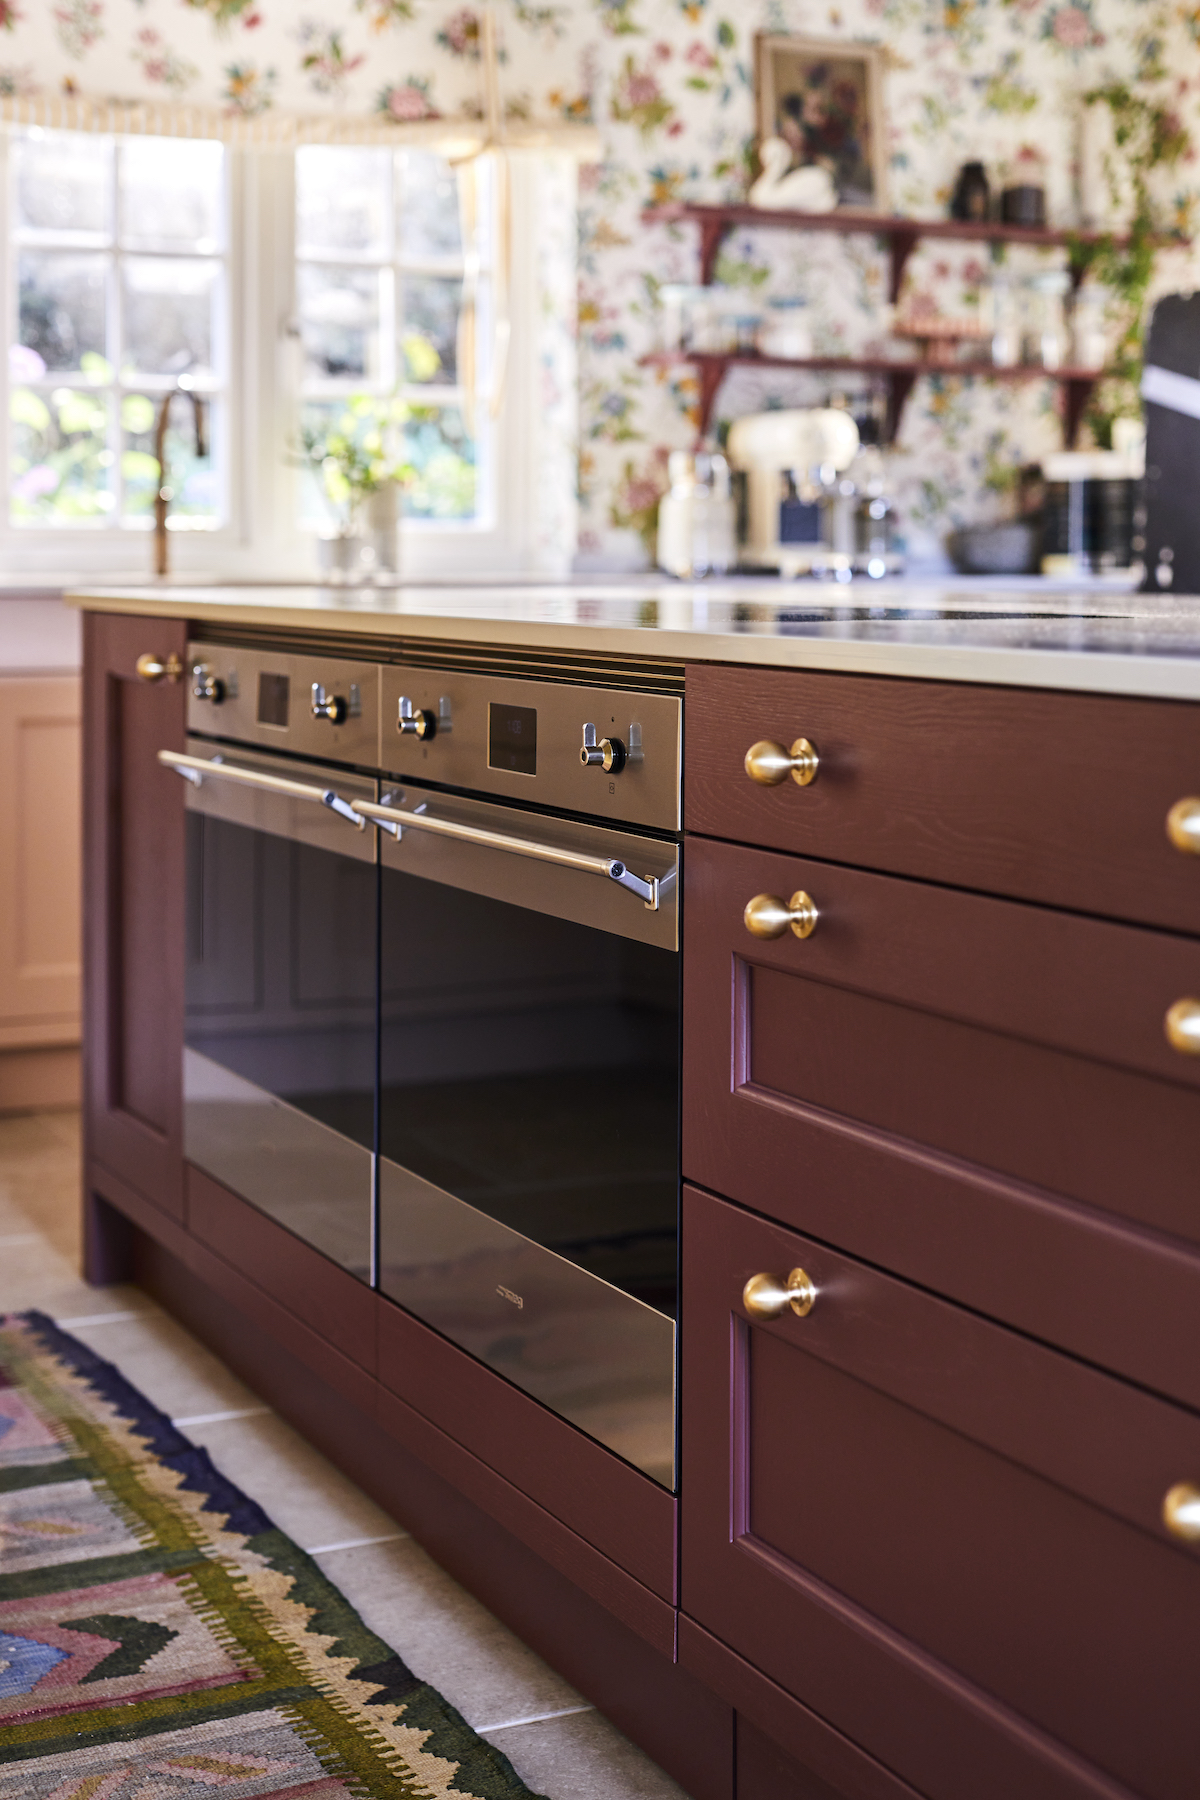 Close up of double oven in kitchen island with round brass handles on drawers next to it.